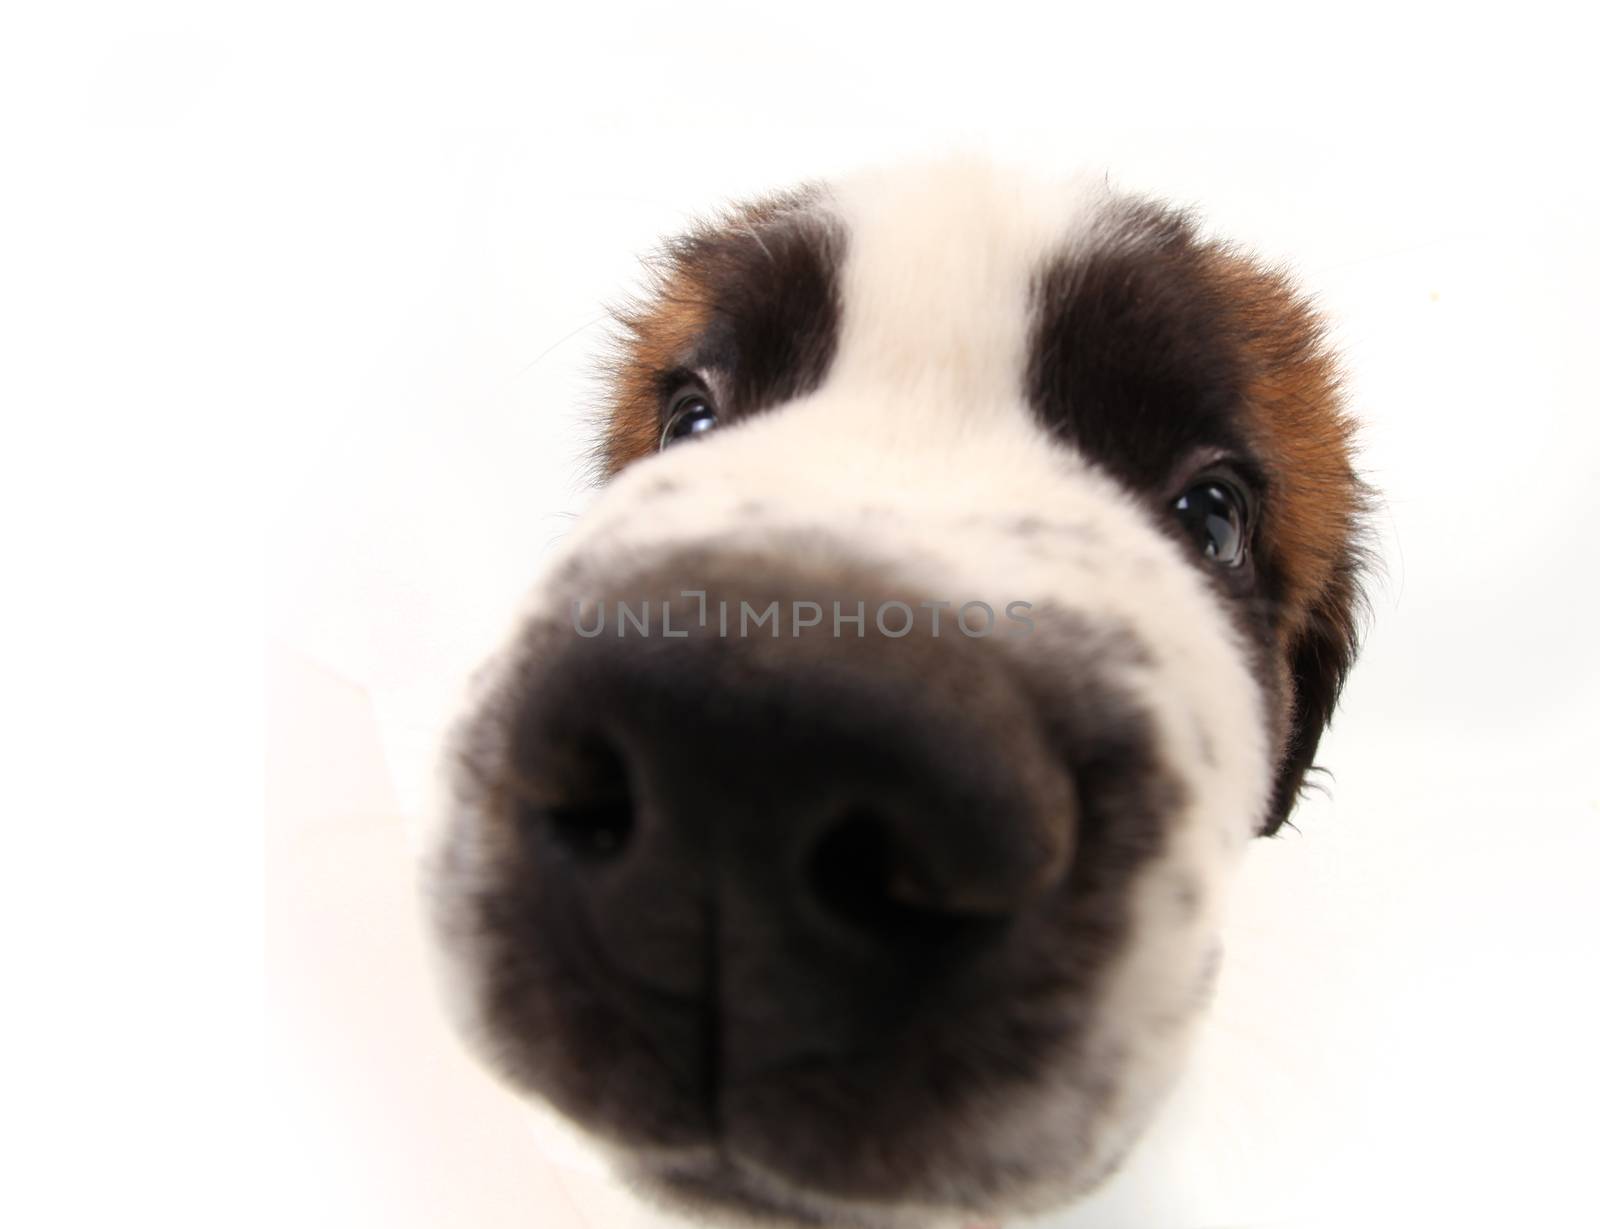 Nosy Sniffing Saint Bernard Puppy on White Background With Distorted Features